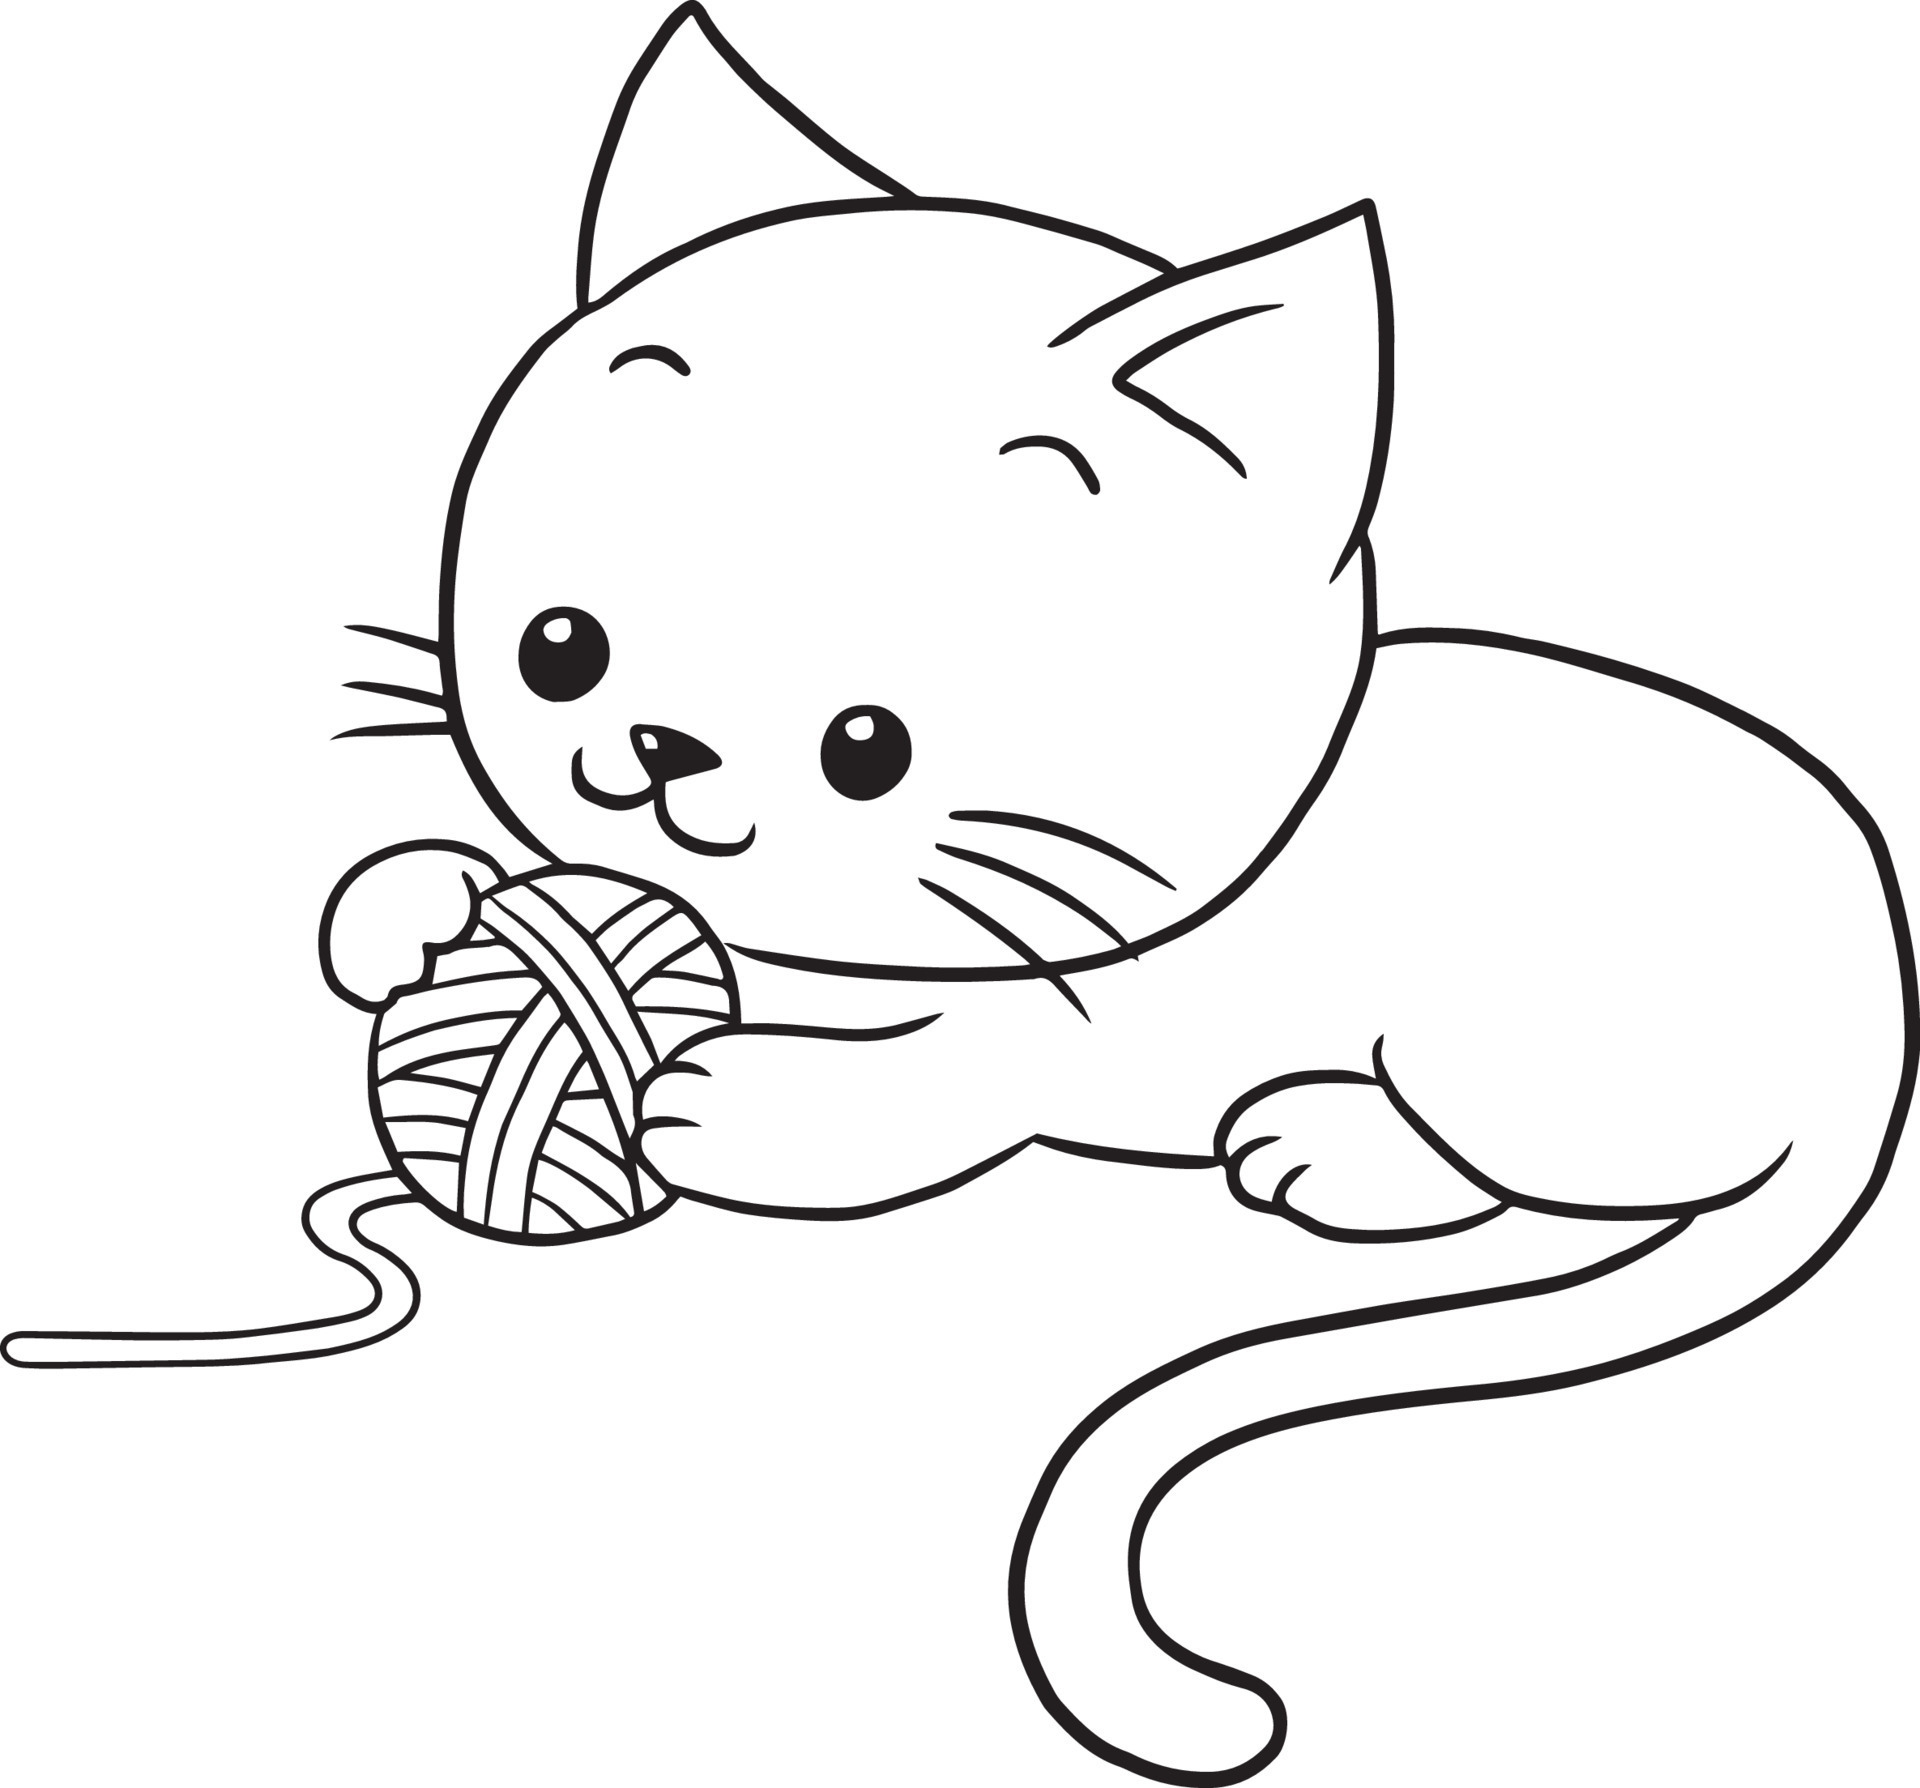 Anime Cat Coloring Pages  Fun and Free Printable Pages for Kids